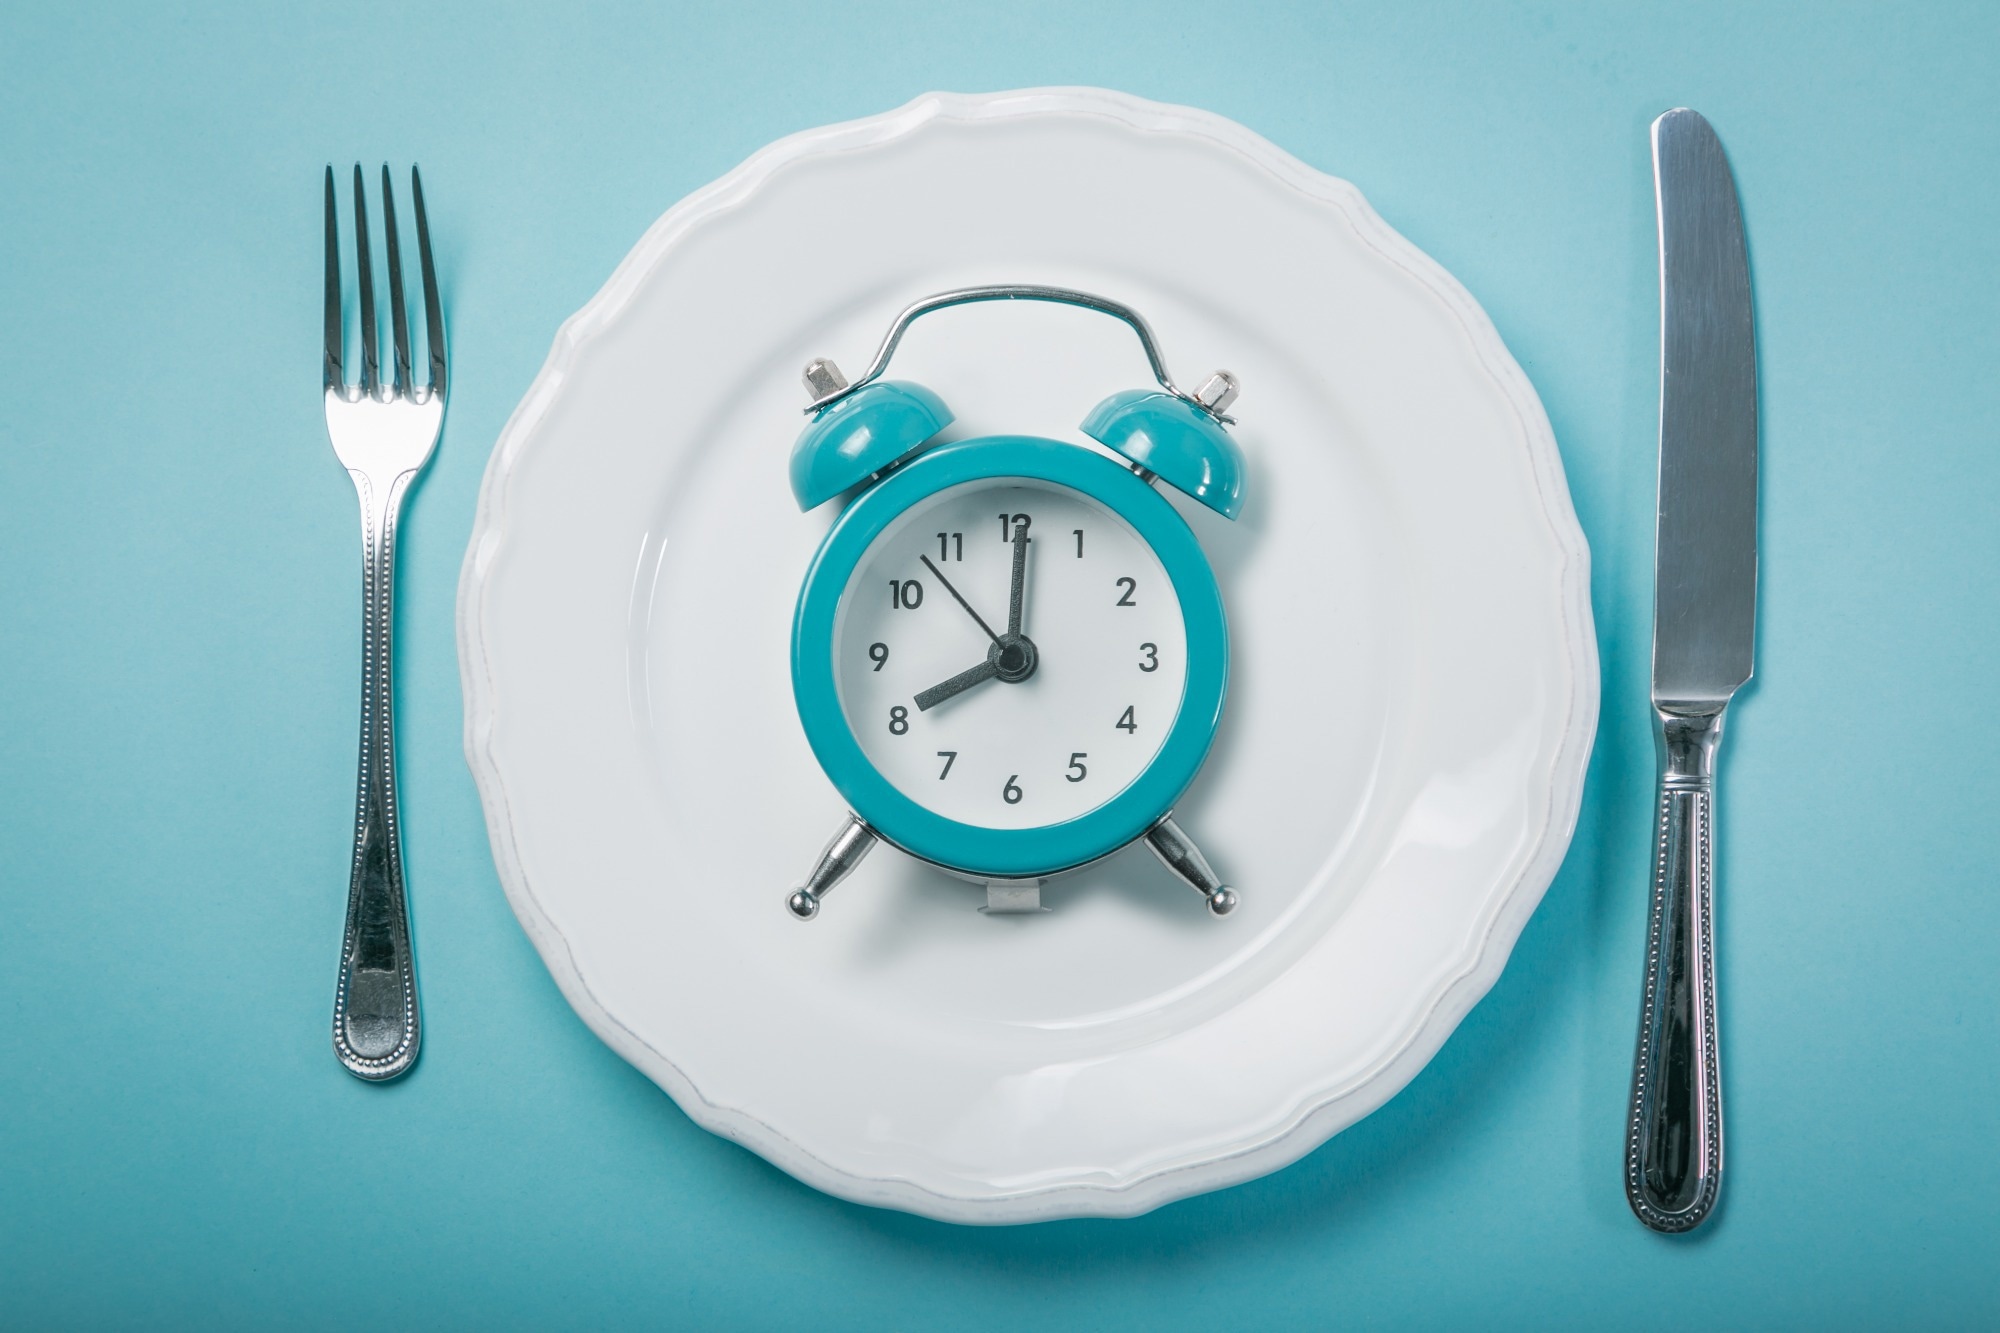 Study: Short-term intensive fasting enhances the immune function of red blood cells in humans. Image Credit: Oleksandra Naumenko / Shutterstock